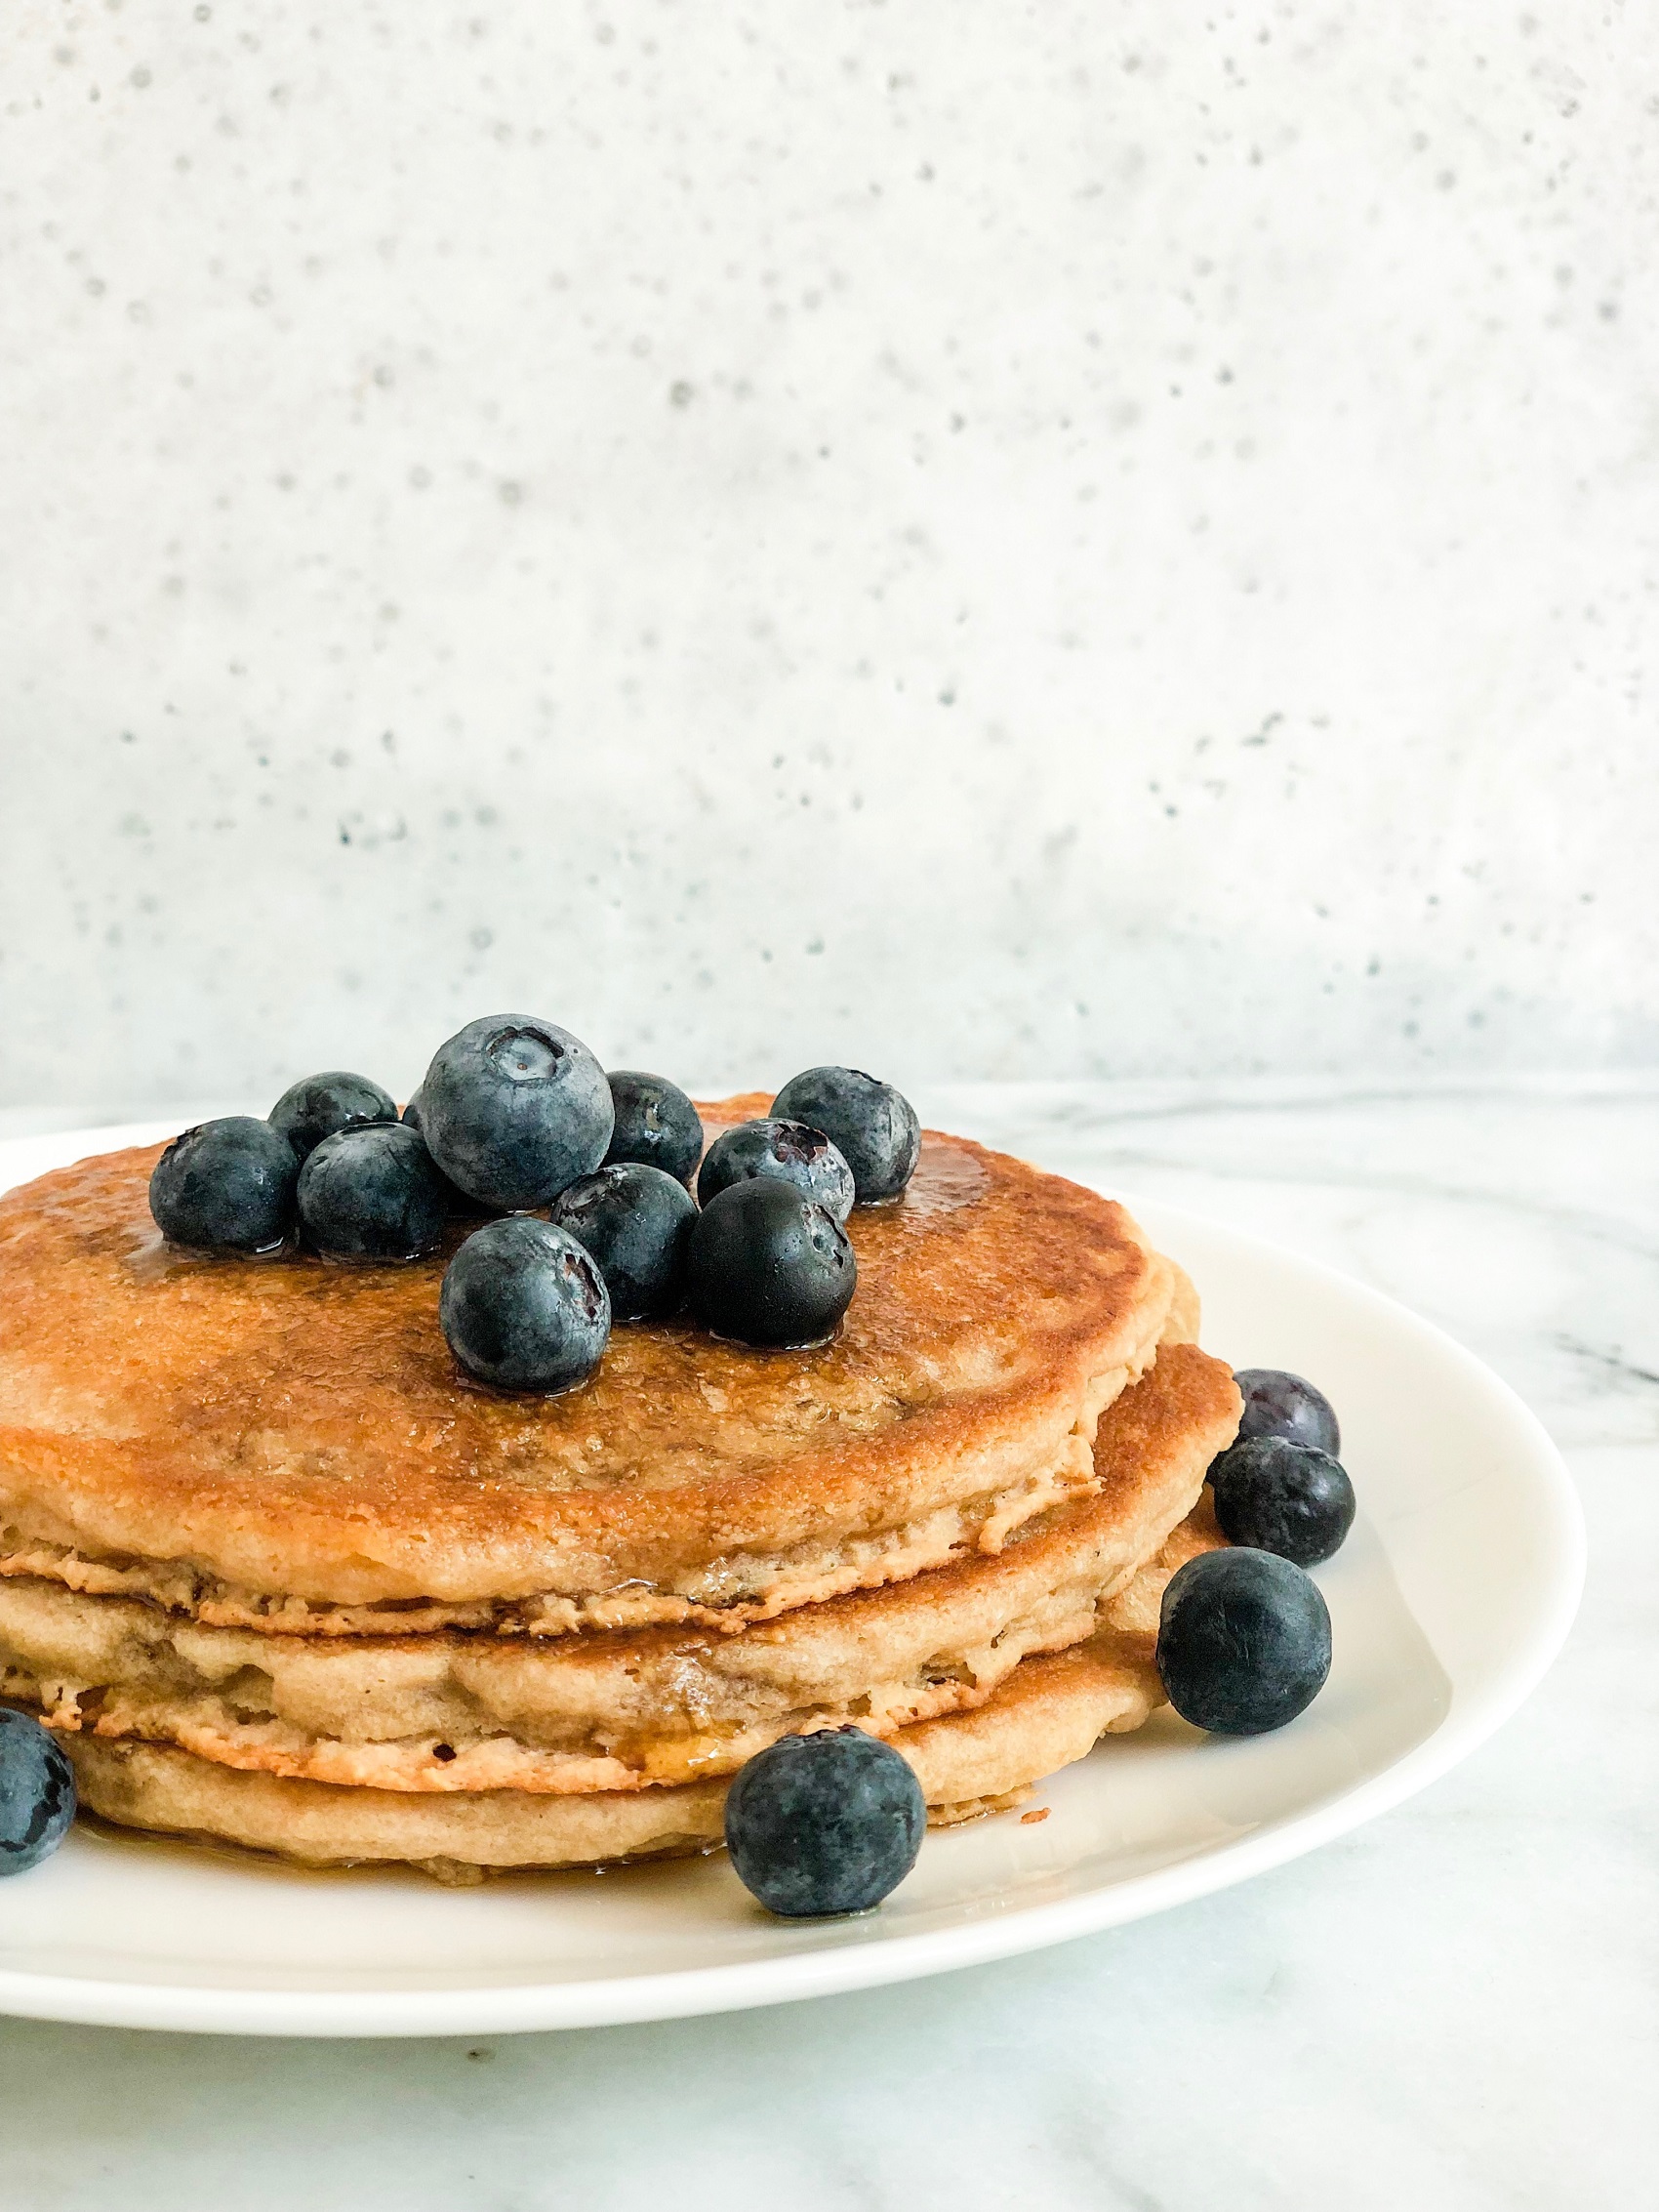 Fluffy Banana Oat Blueberry Pancakes | Living Well With Nic